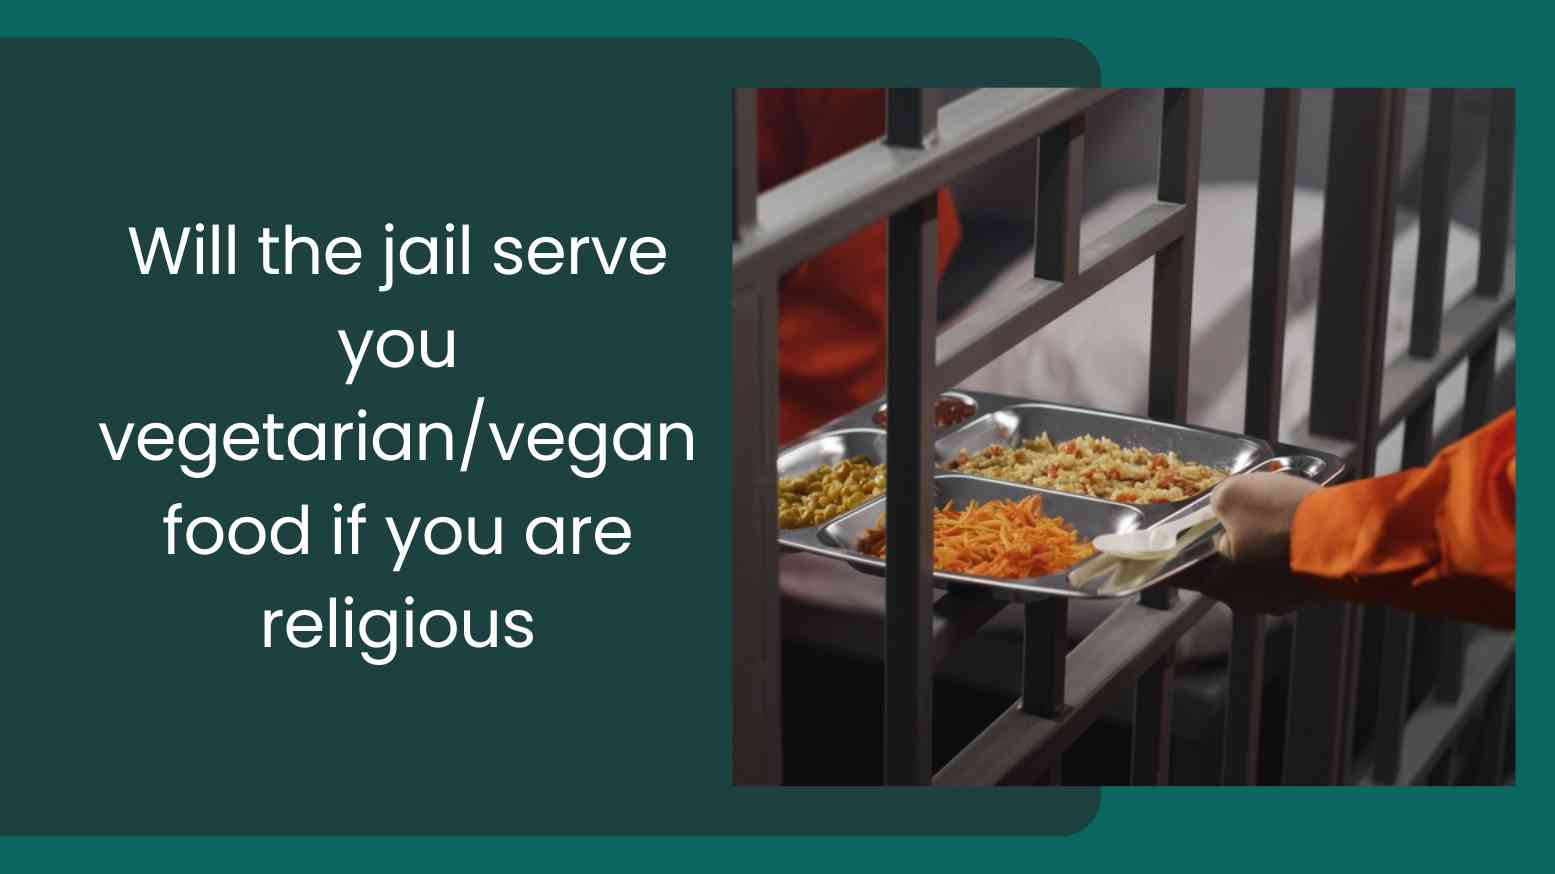 Will the jail serve you vegetarian/vegan food if you are religious